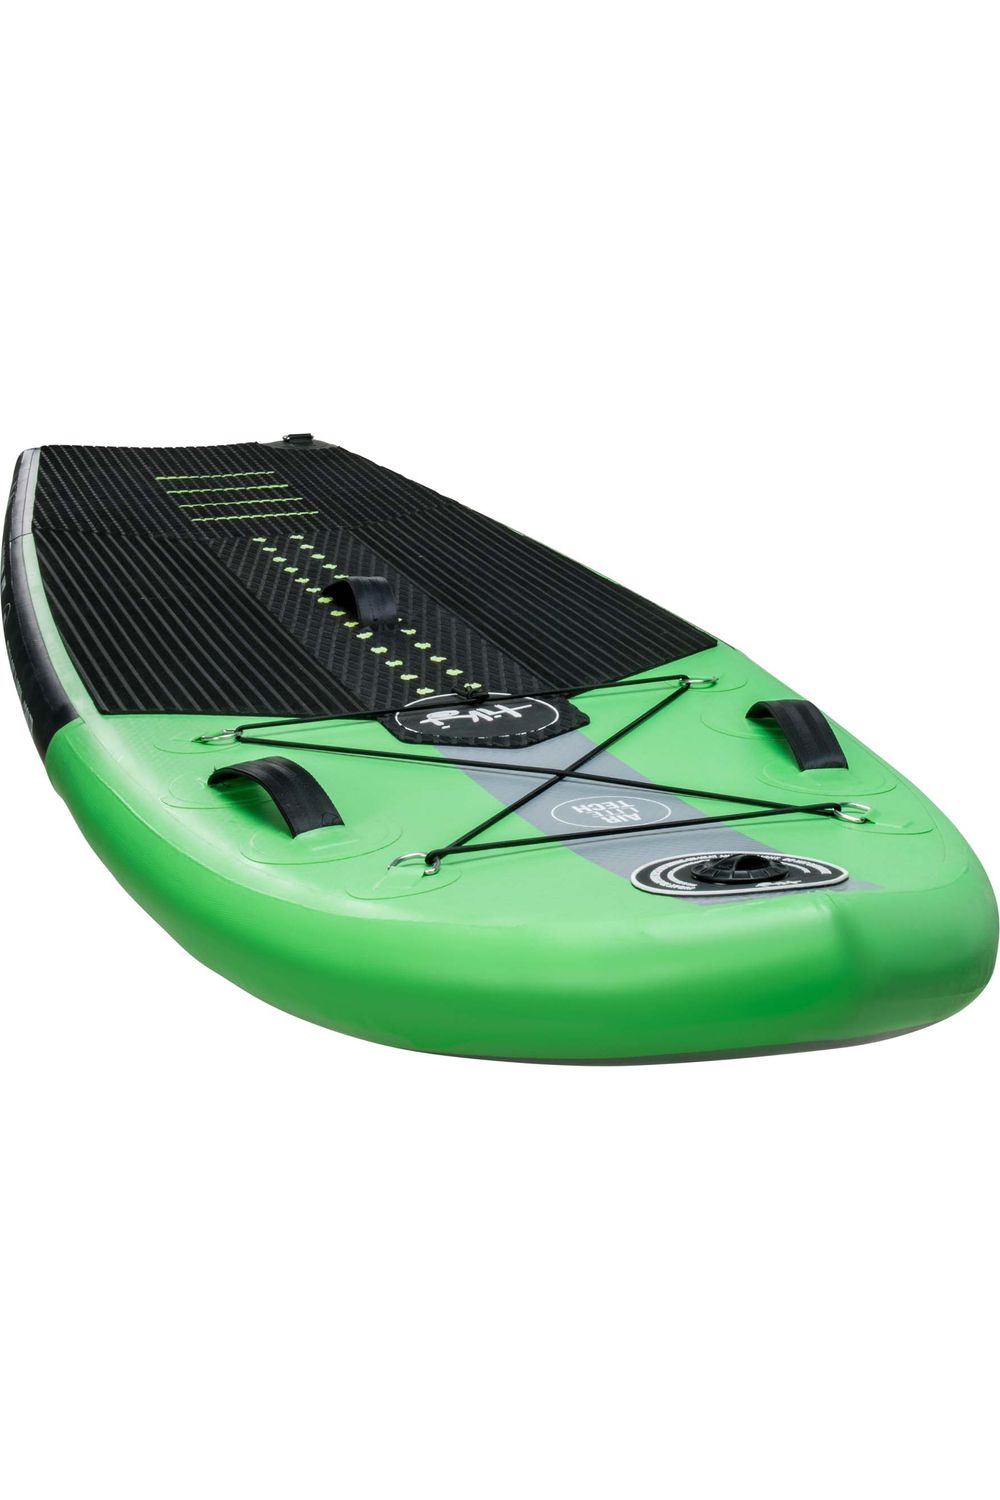 Tiki 6'10 Whip It Inflatable SUP + Accessories Pack with Paddle